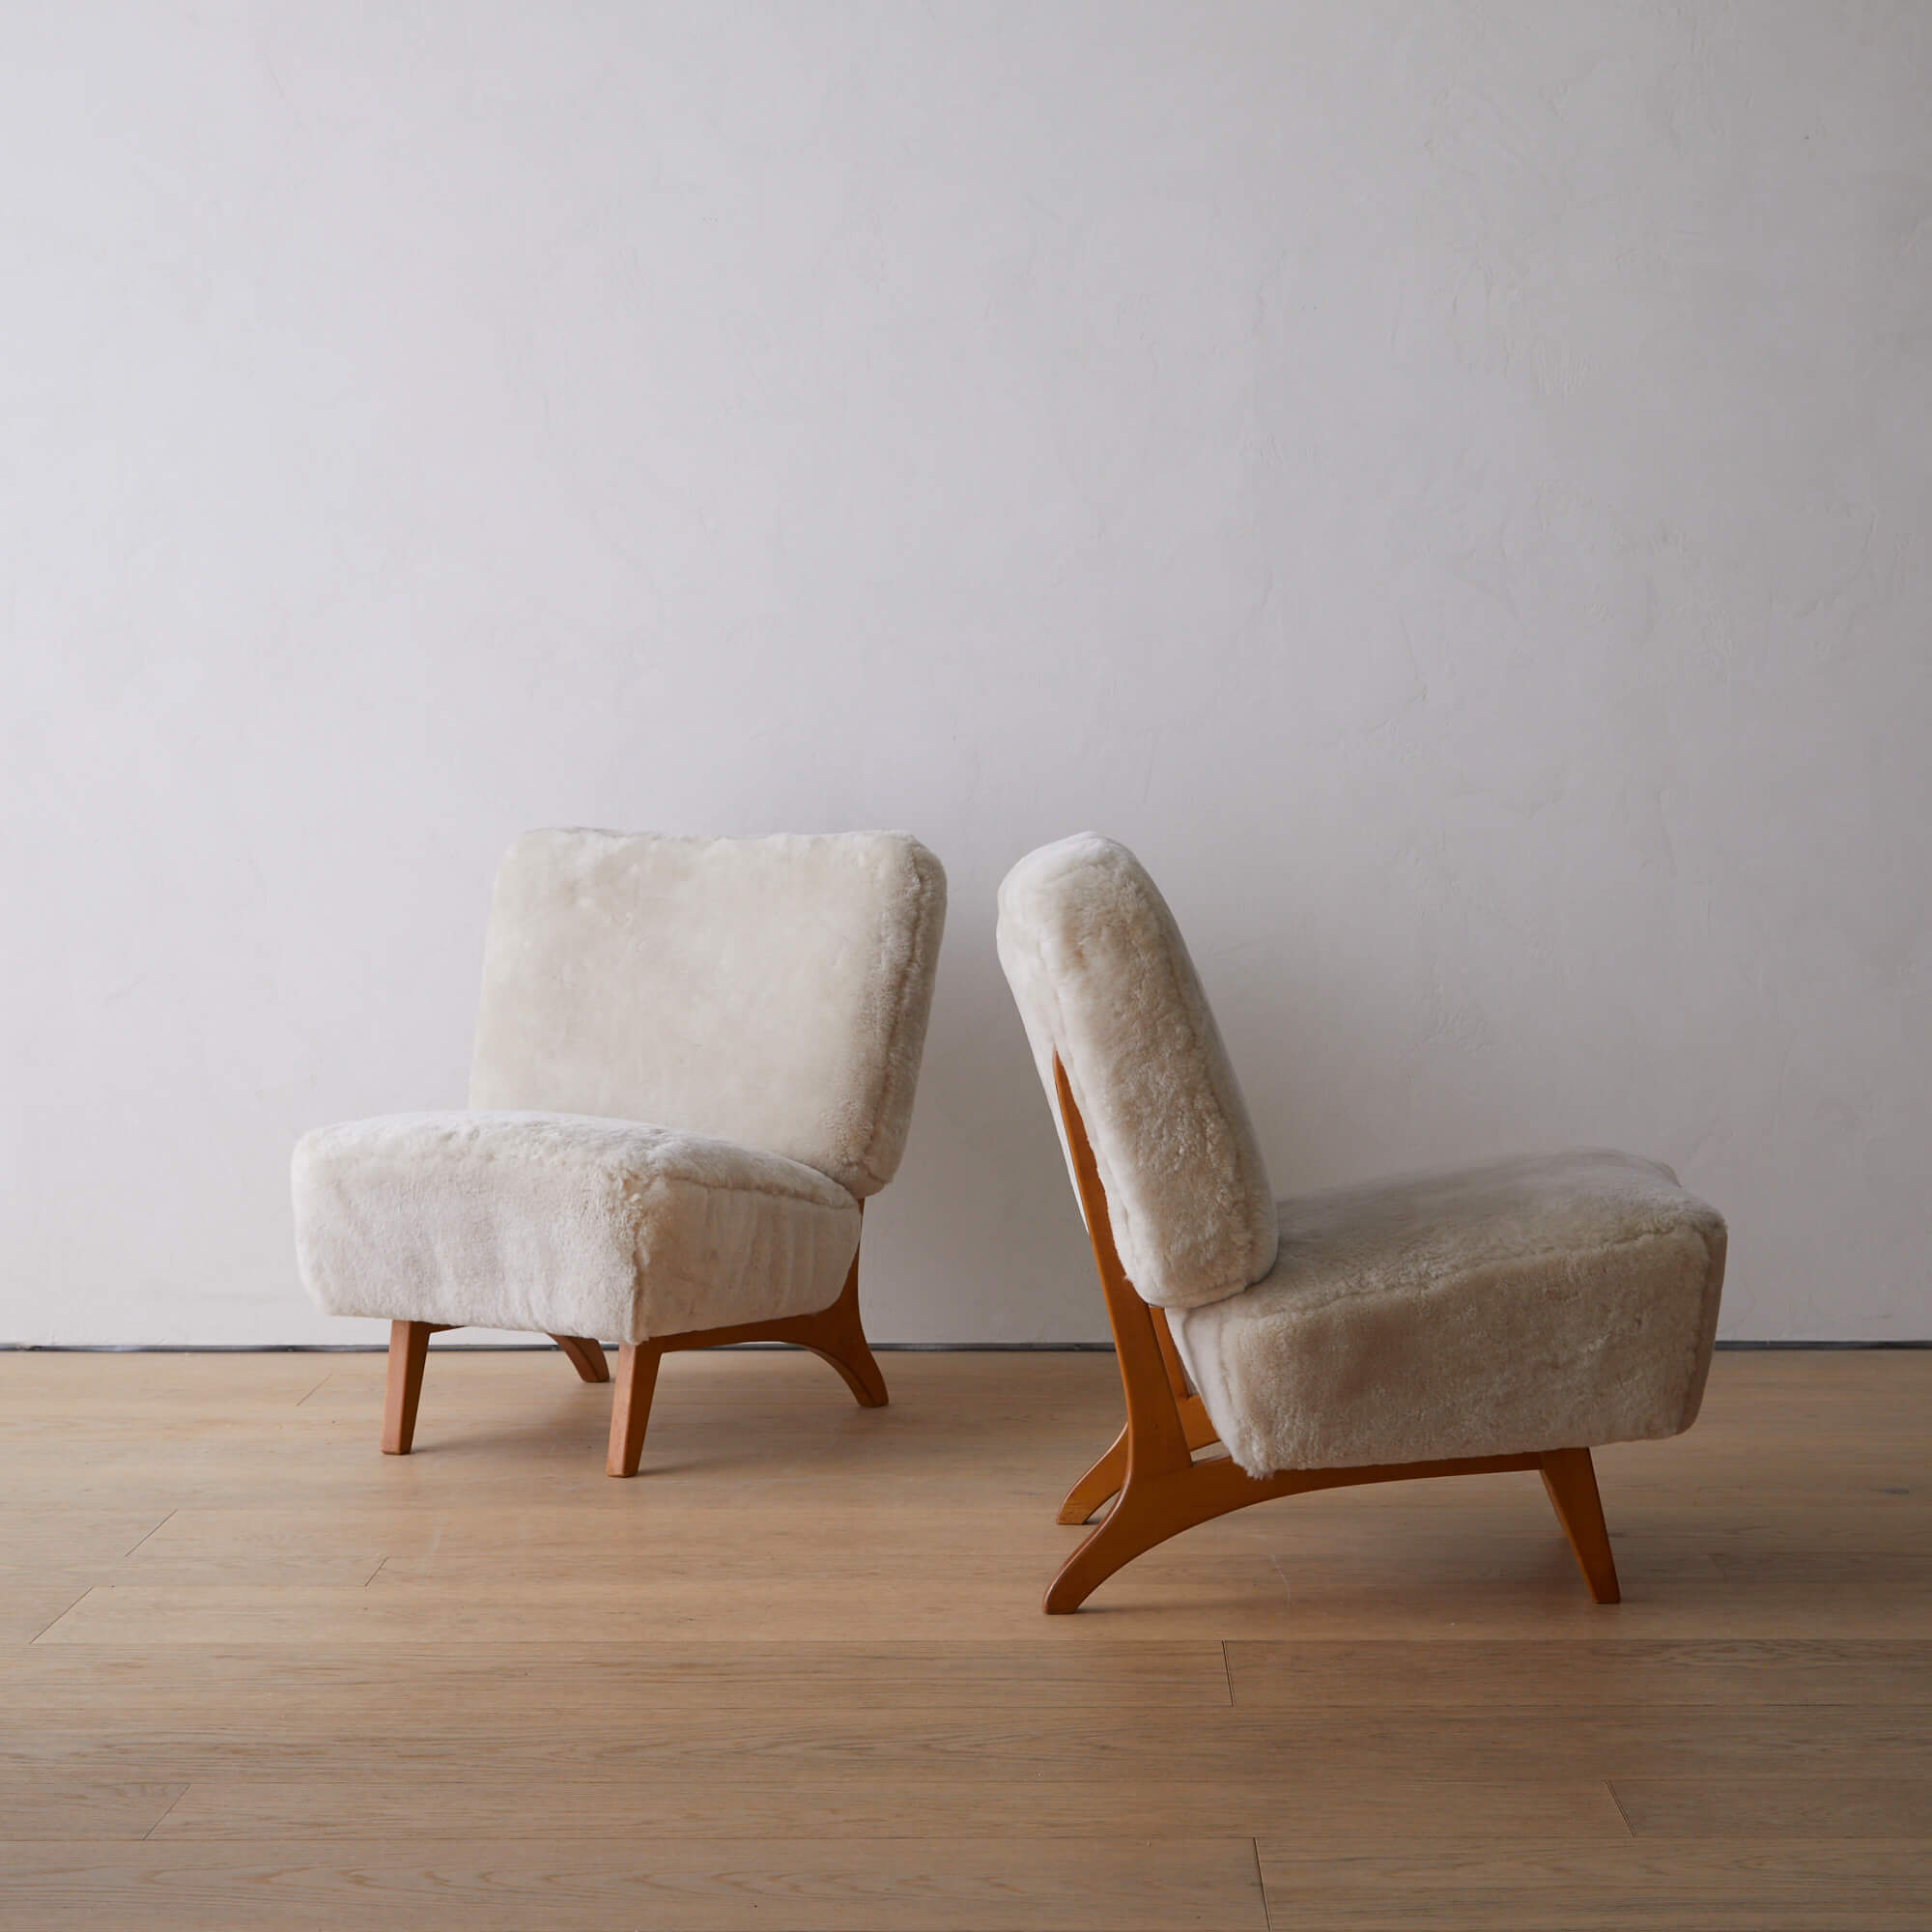 Pair of "Susanna" chairs by Oiva Parviainen